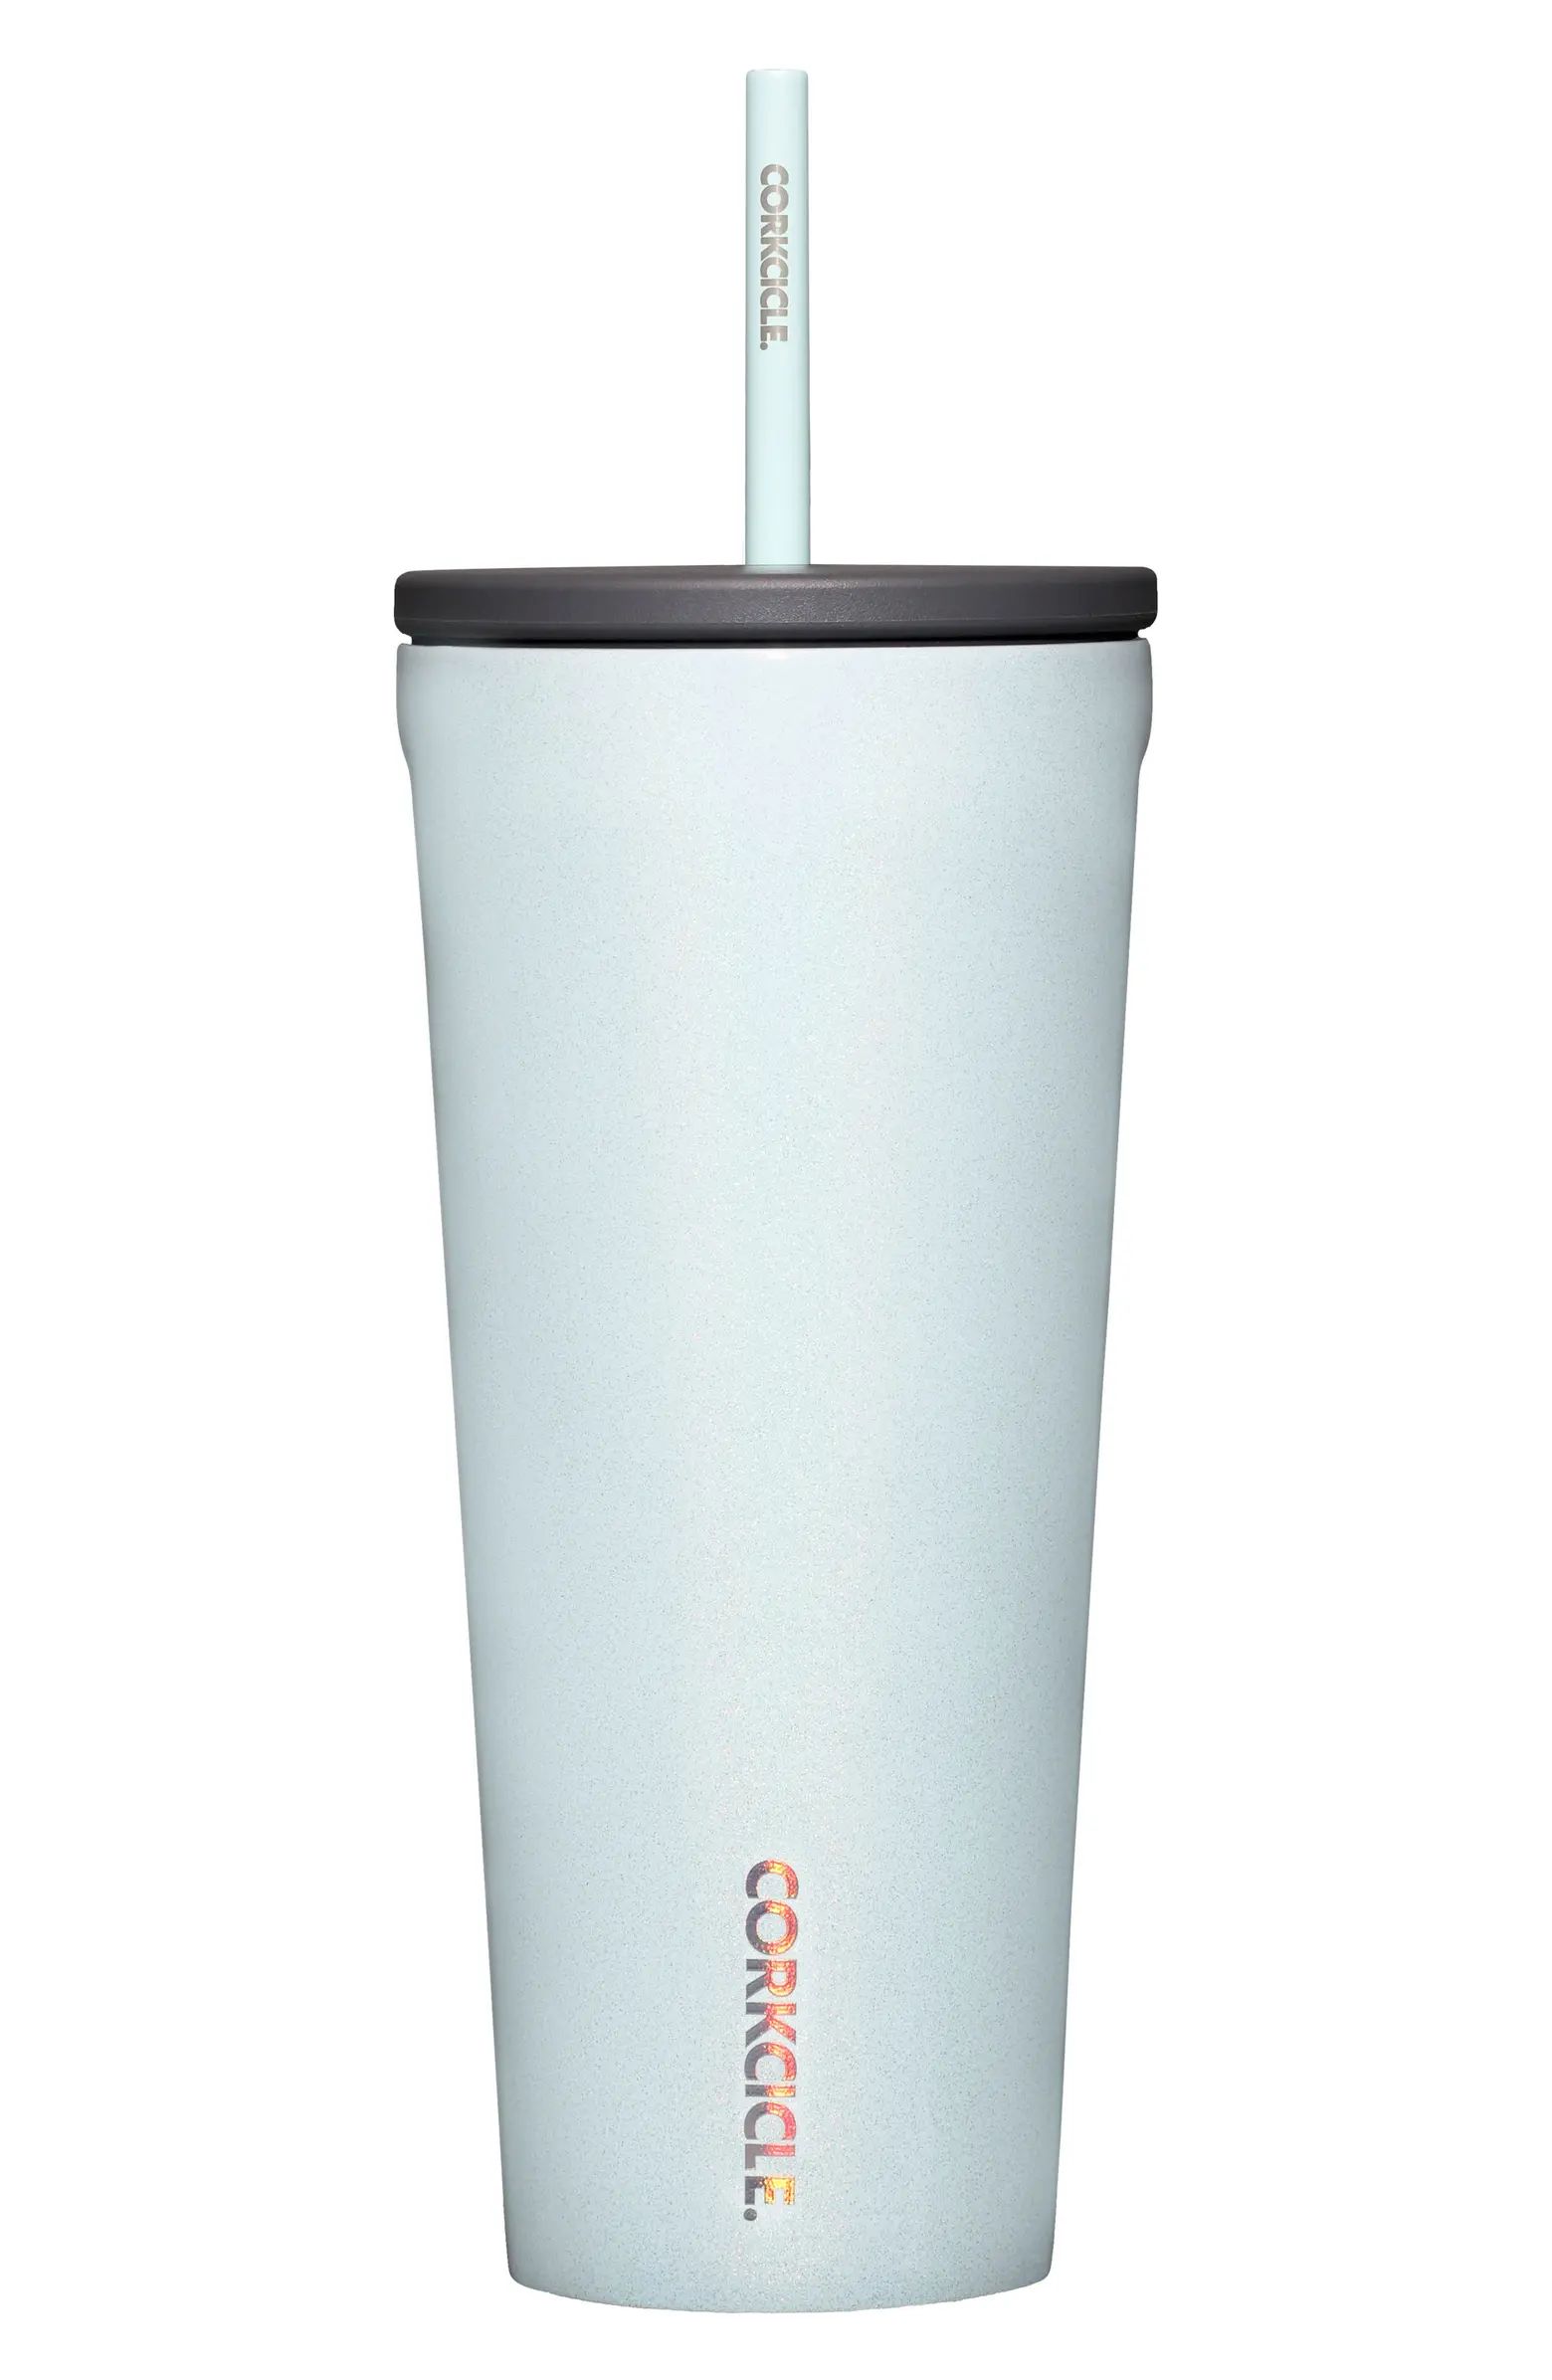 24-Ounce Insulated Cup with Straw | Nordstrom